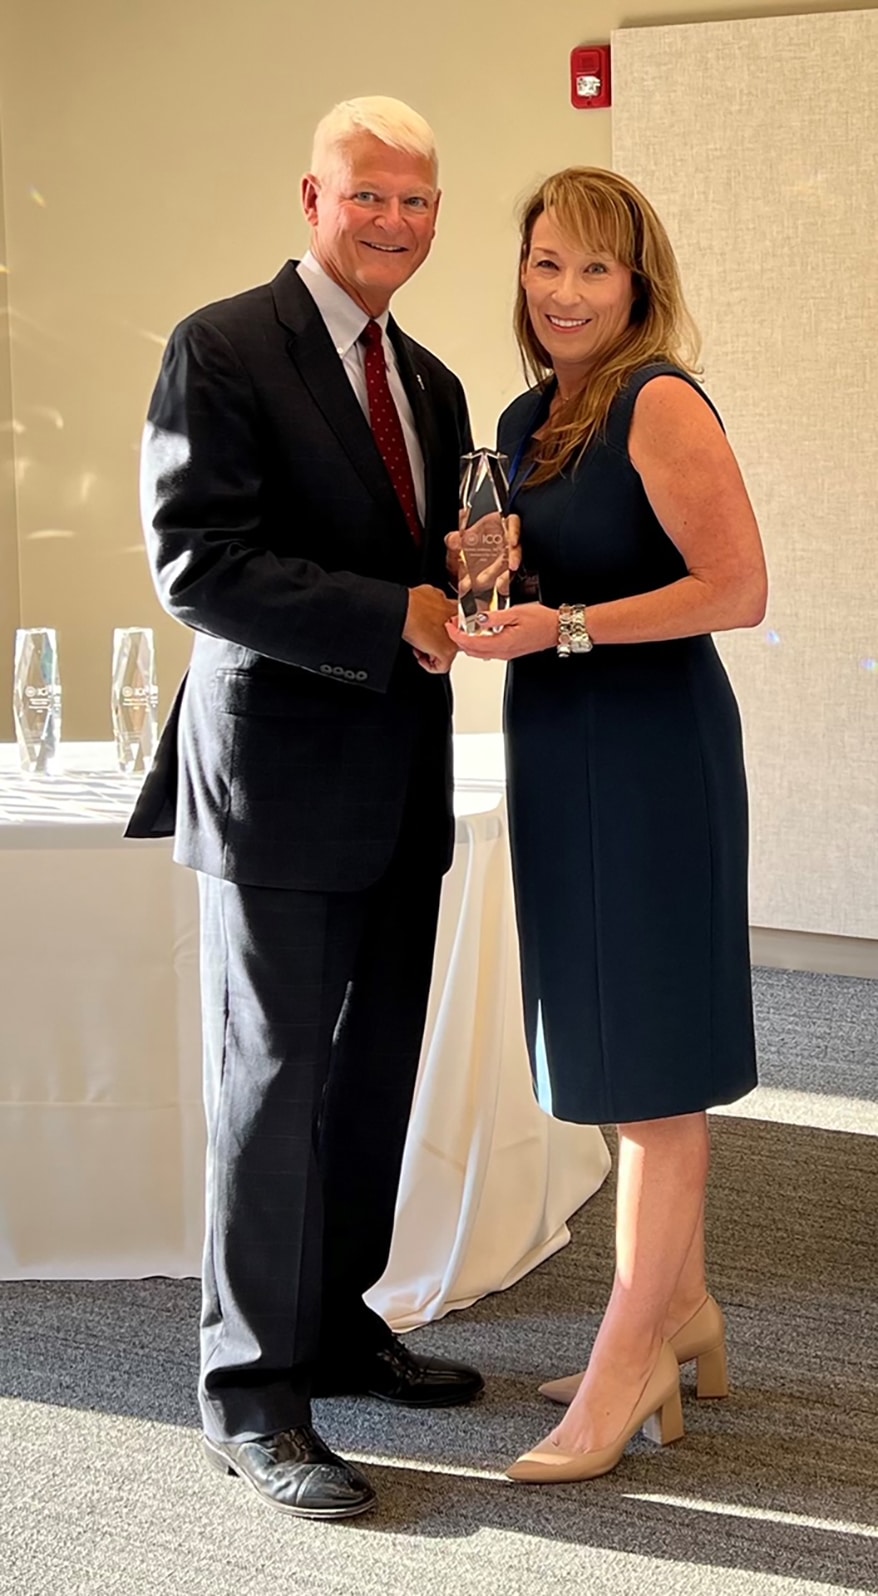 CooperVision&#8217;s Michele Andrews, OD, Named ICO 2022 Alumnus of the Year